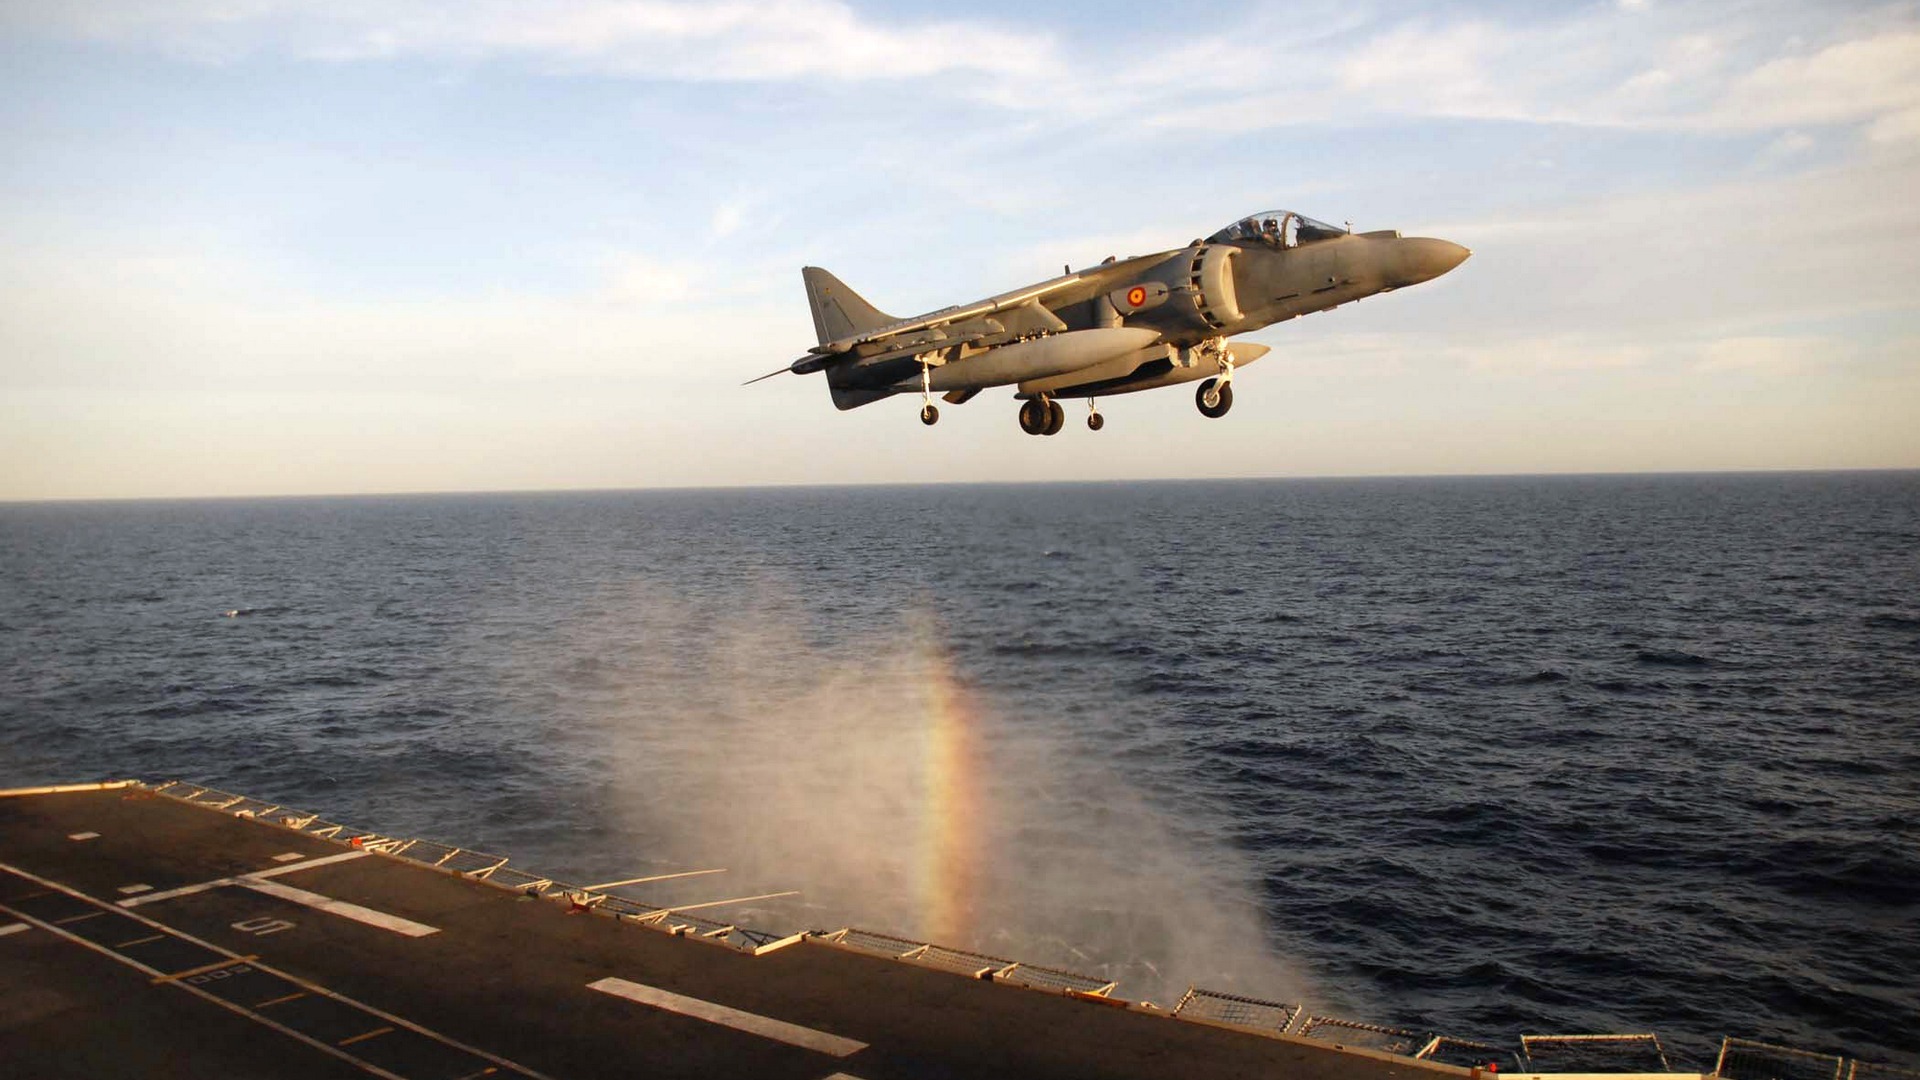 US_Navy_070223-N-3888C-005_An_AV-8B_Harrier_II_from_the_Spanish_aircraft_carrier_Principe_de_Asturias_(R_11)_hovers_in_for_a_landing_after_a_live_fire_exercise.jpg